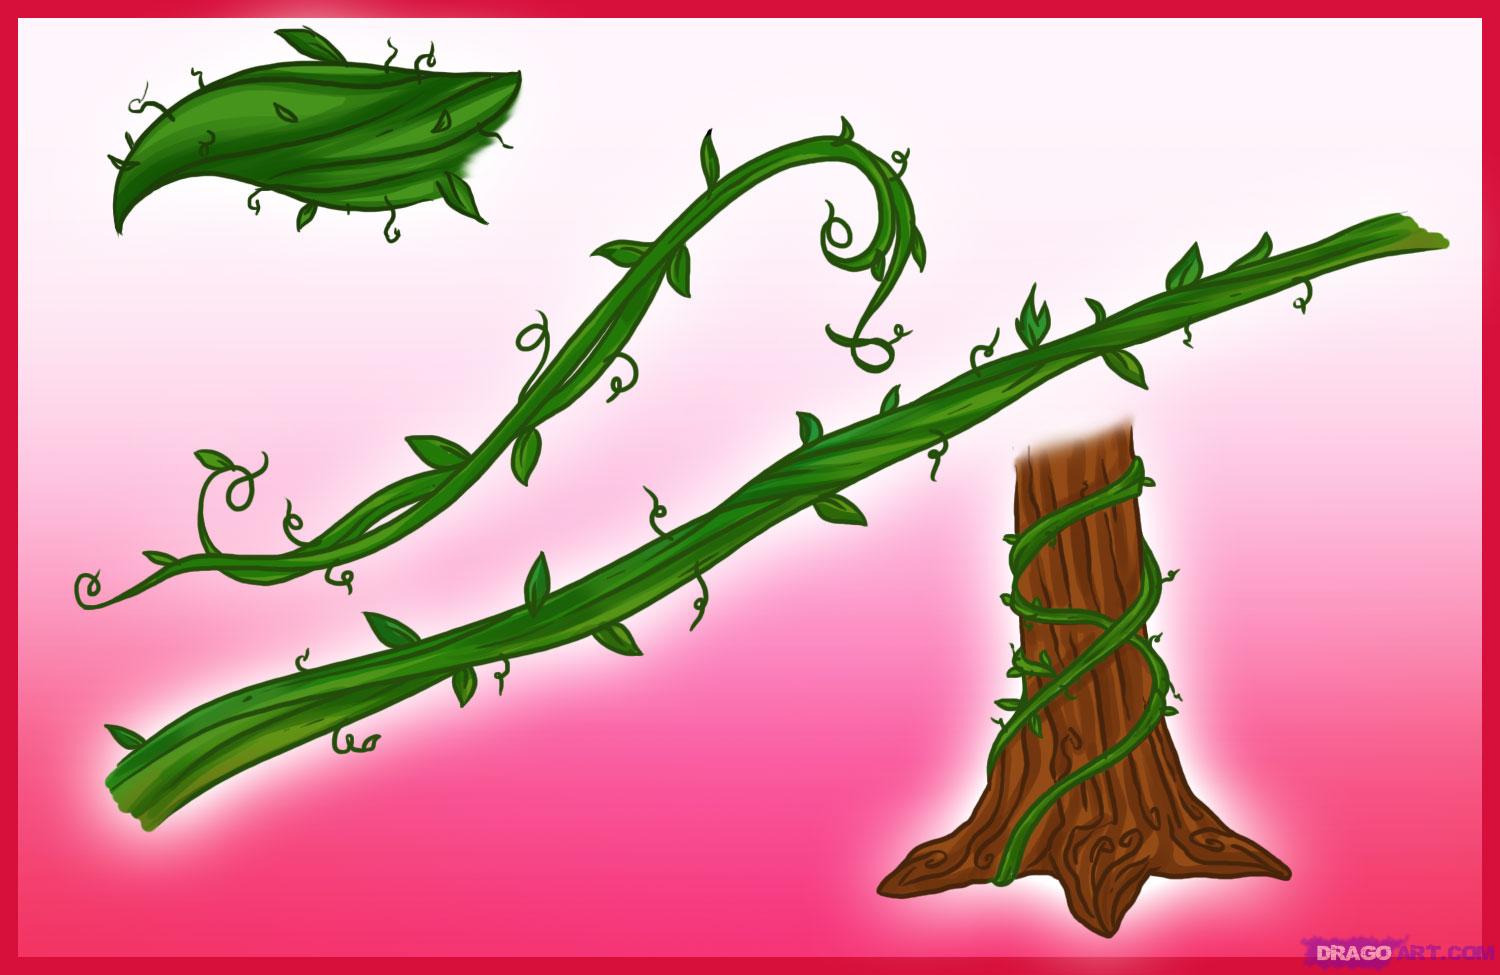 Pictures Of Roses And Vines - ClipArt Best